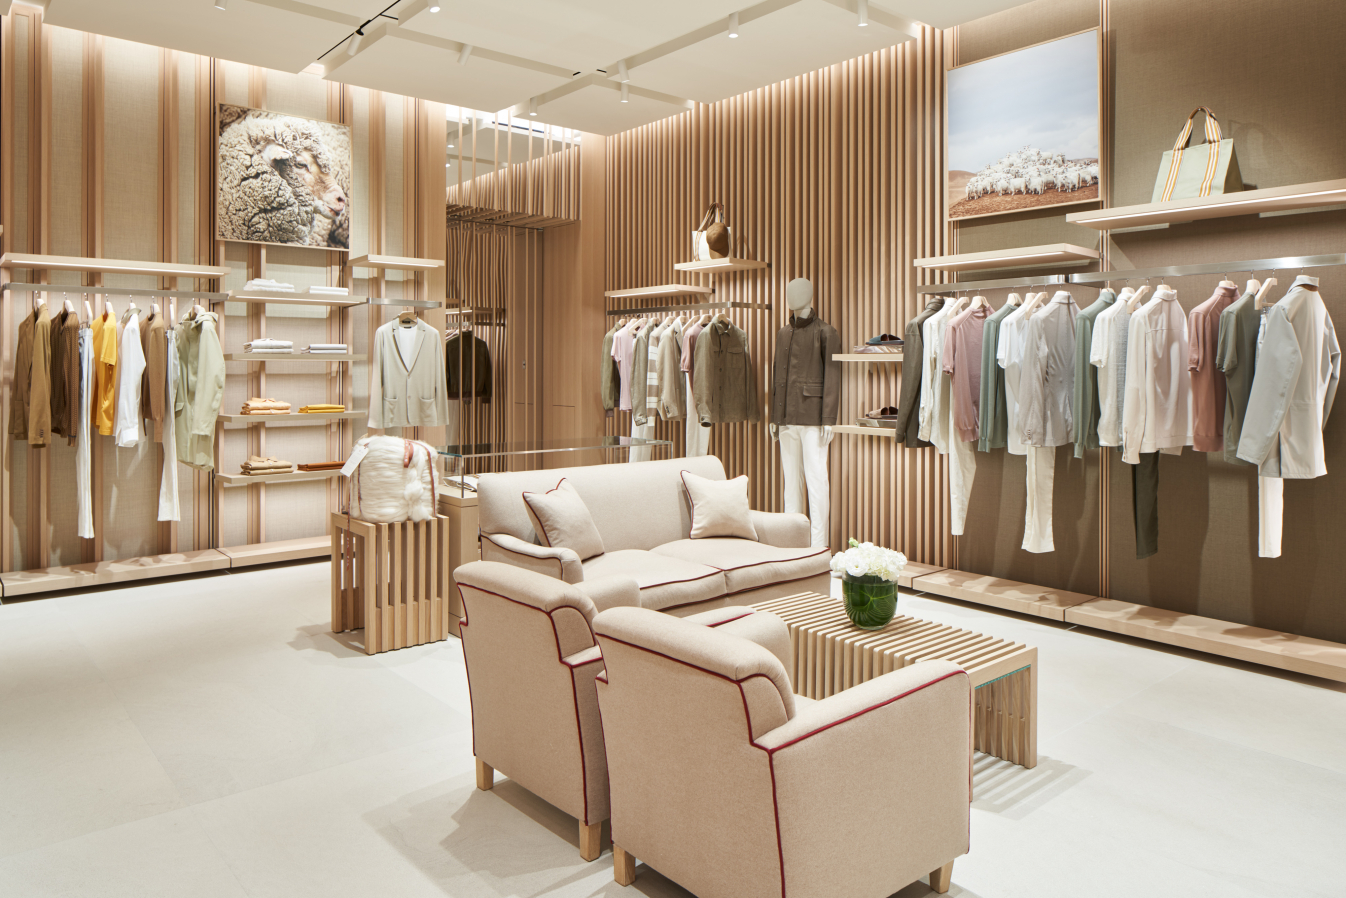 Loro Piana opened its flagship store in Tokyo's Ginza district